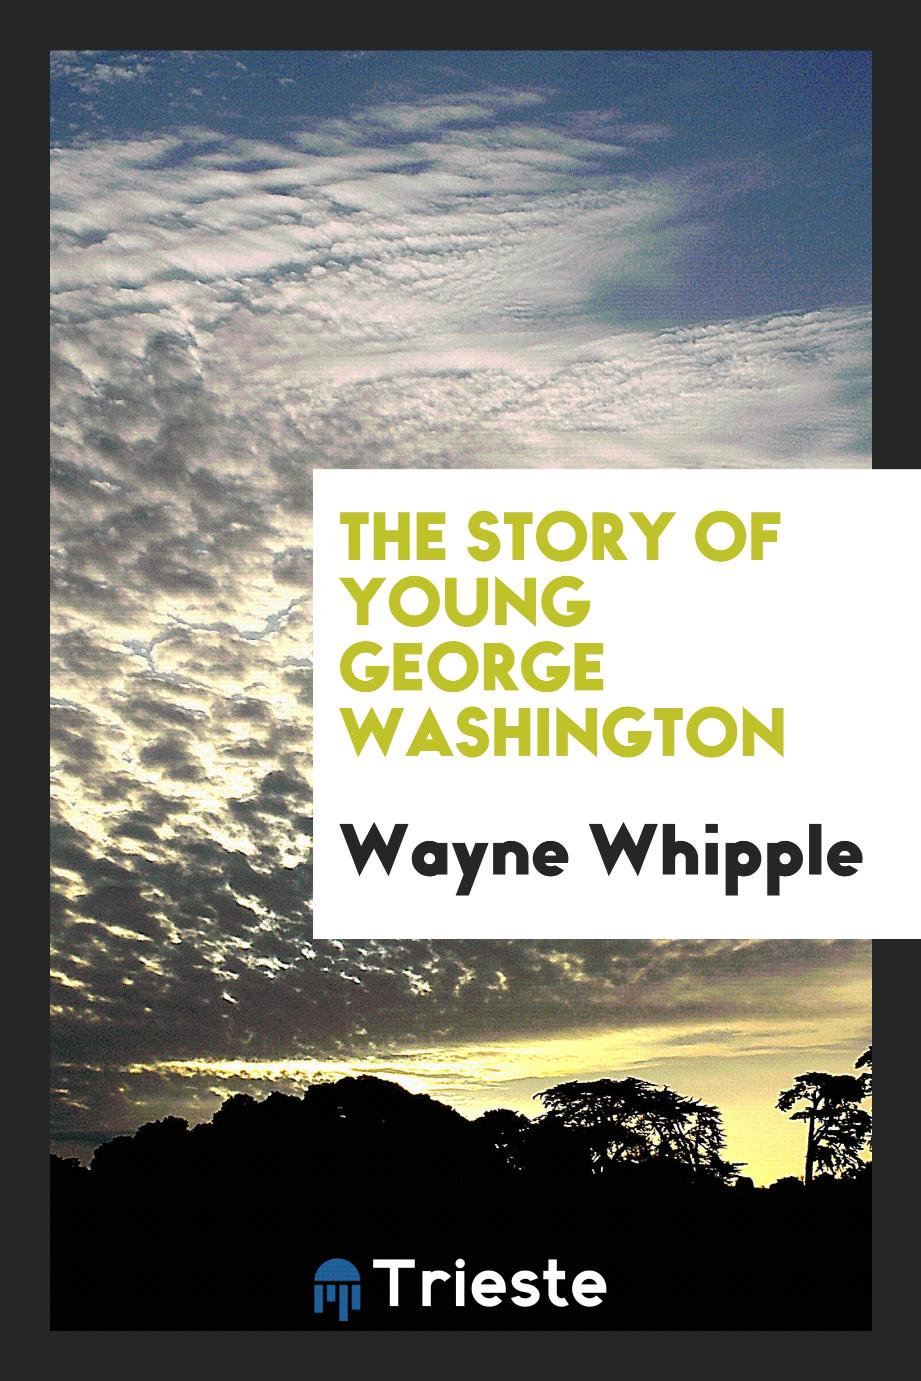 The story of young George Washington